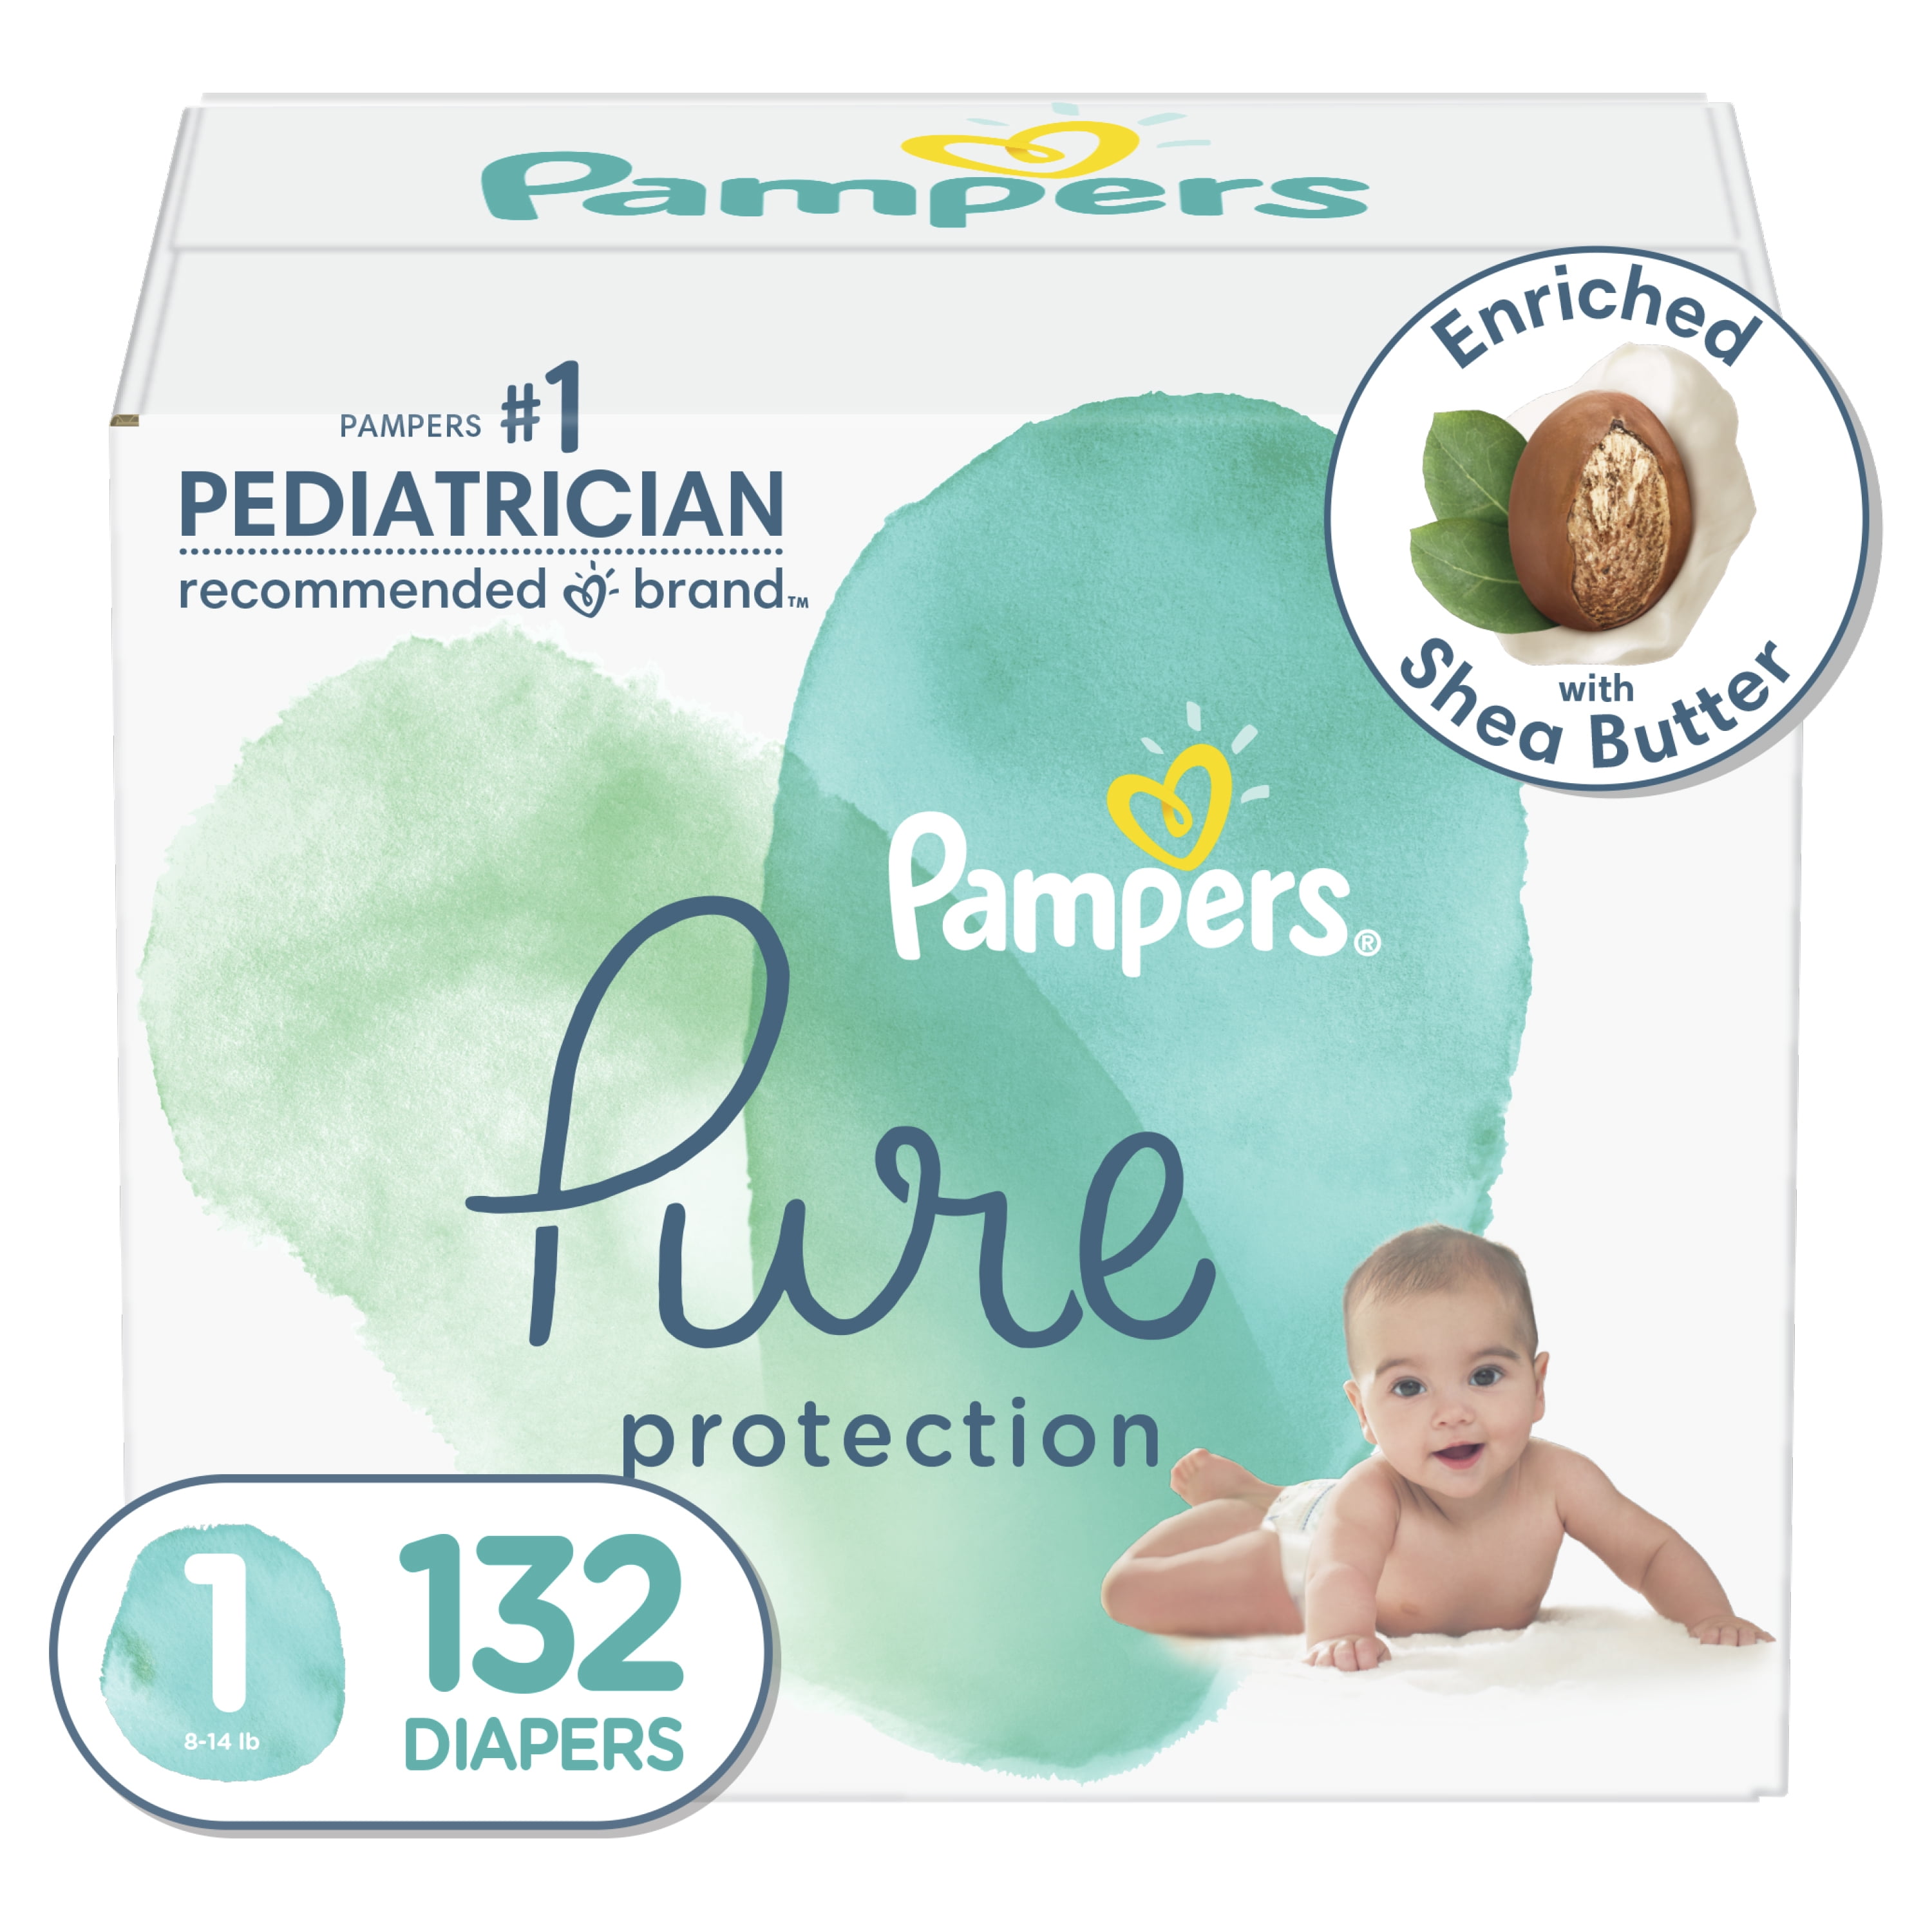 Pampers Pure Protection Natural Newborn Diapers, Size 1, 132 Ct - 1